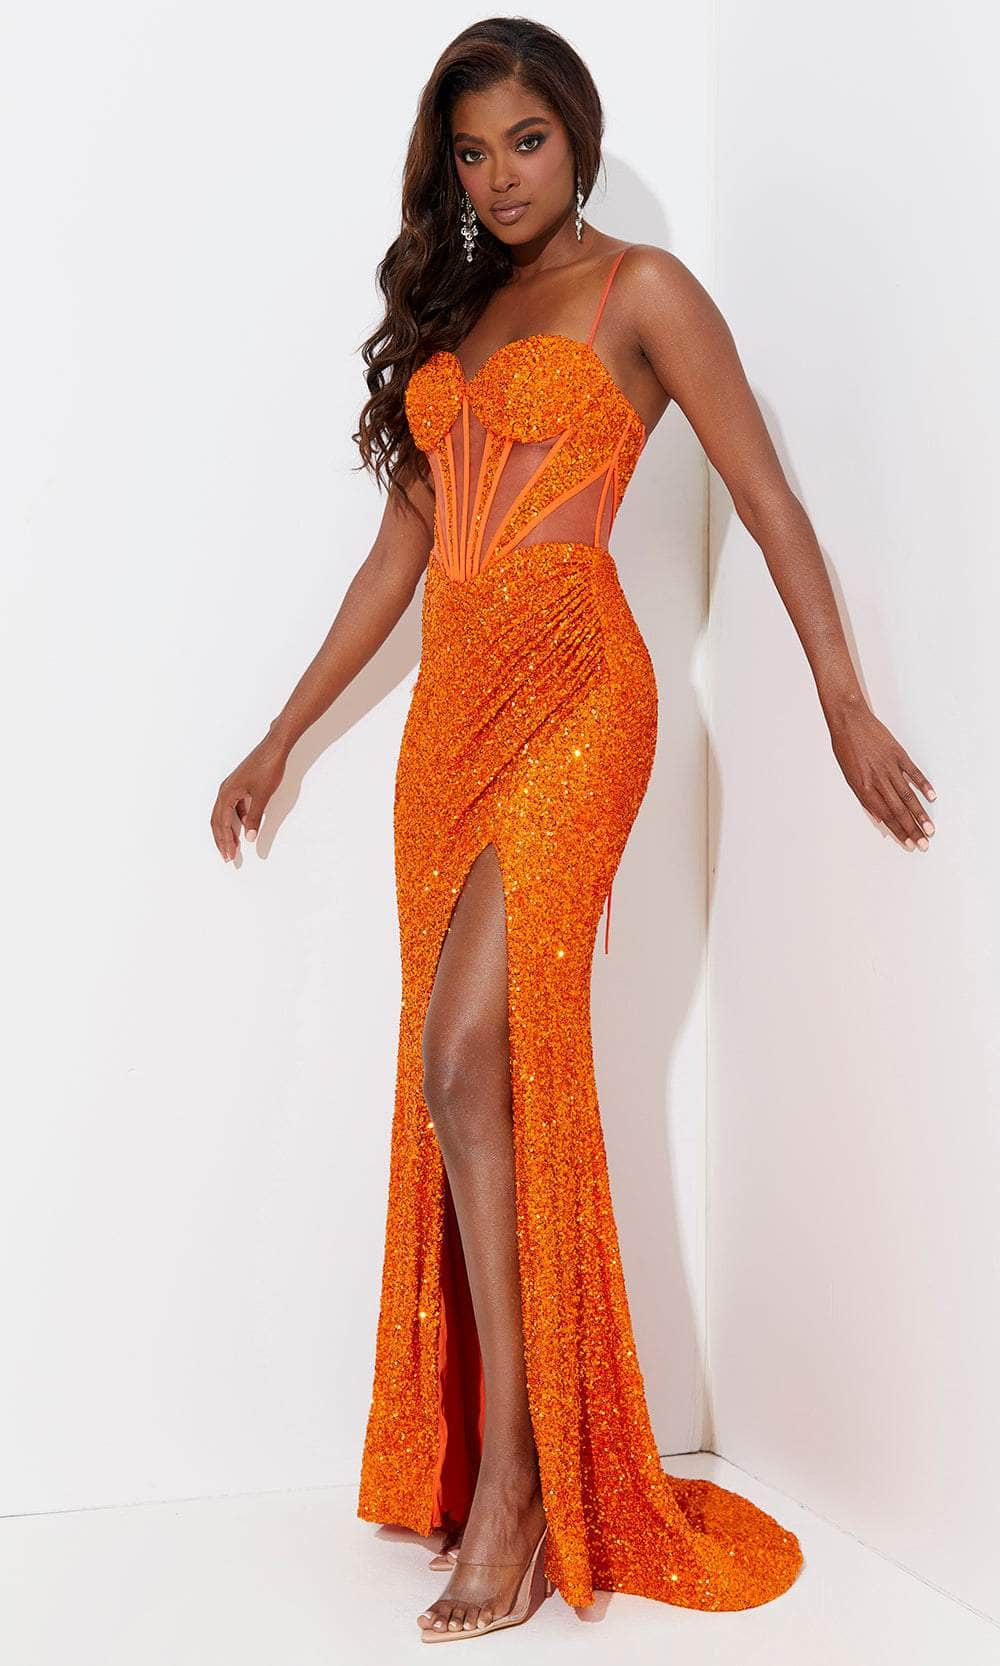 Image of Jasz Couture 7503 - Spaghetti Strap Bustier Prom Dress